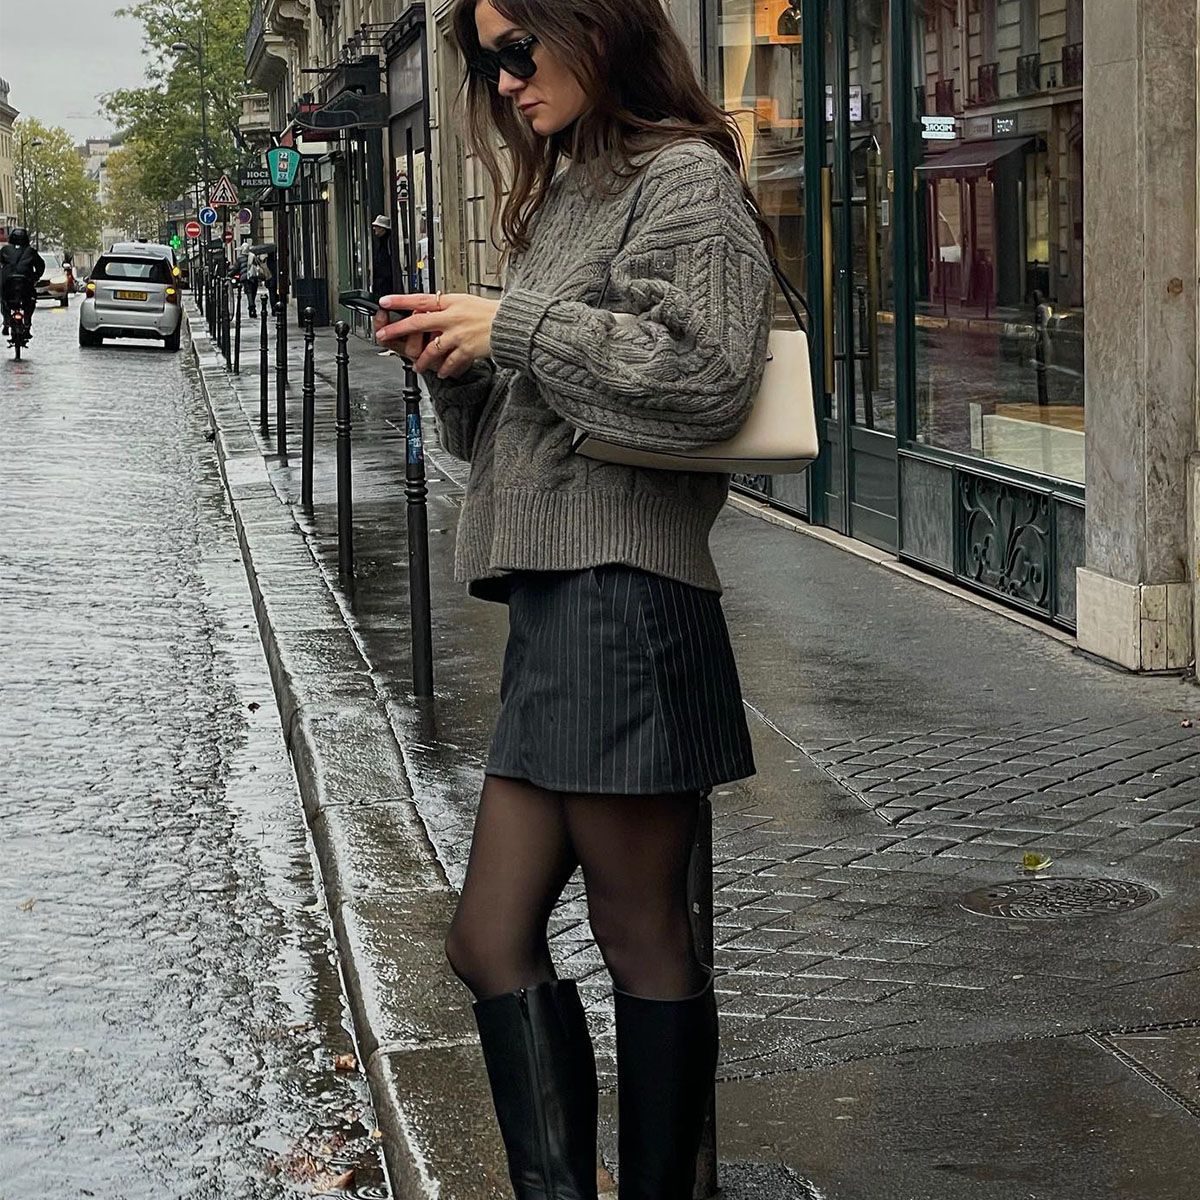 What is the best way to style black tights? What length of skirt